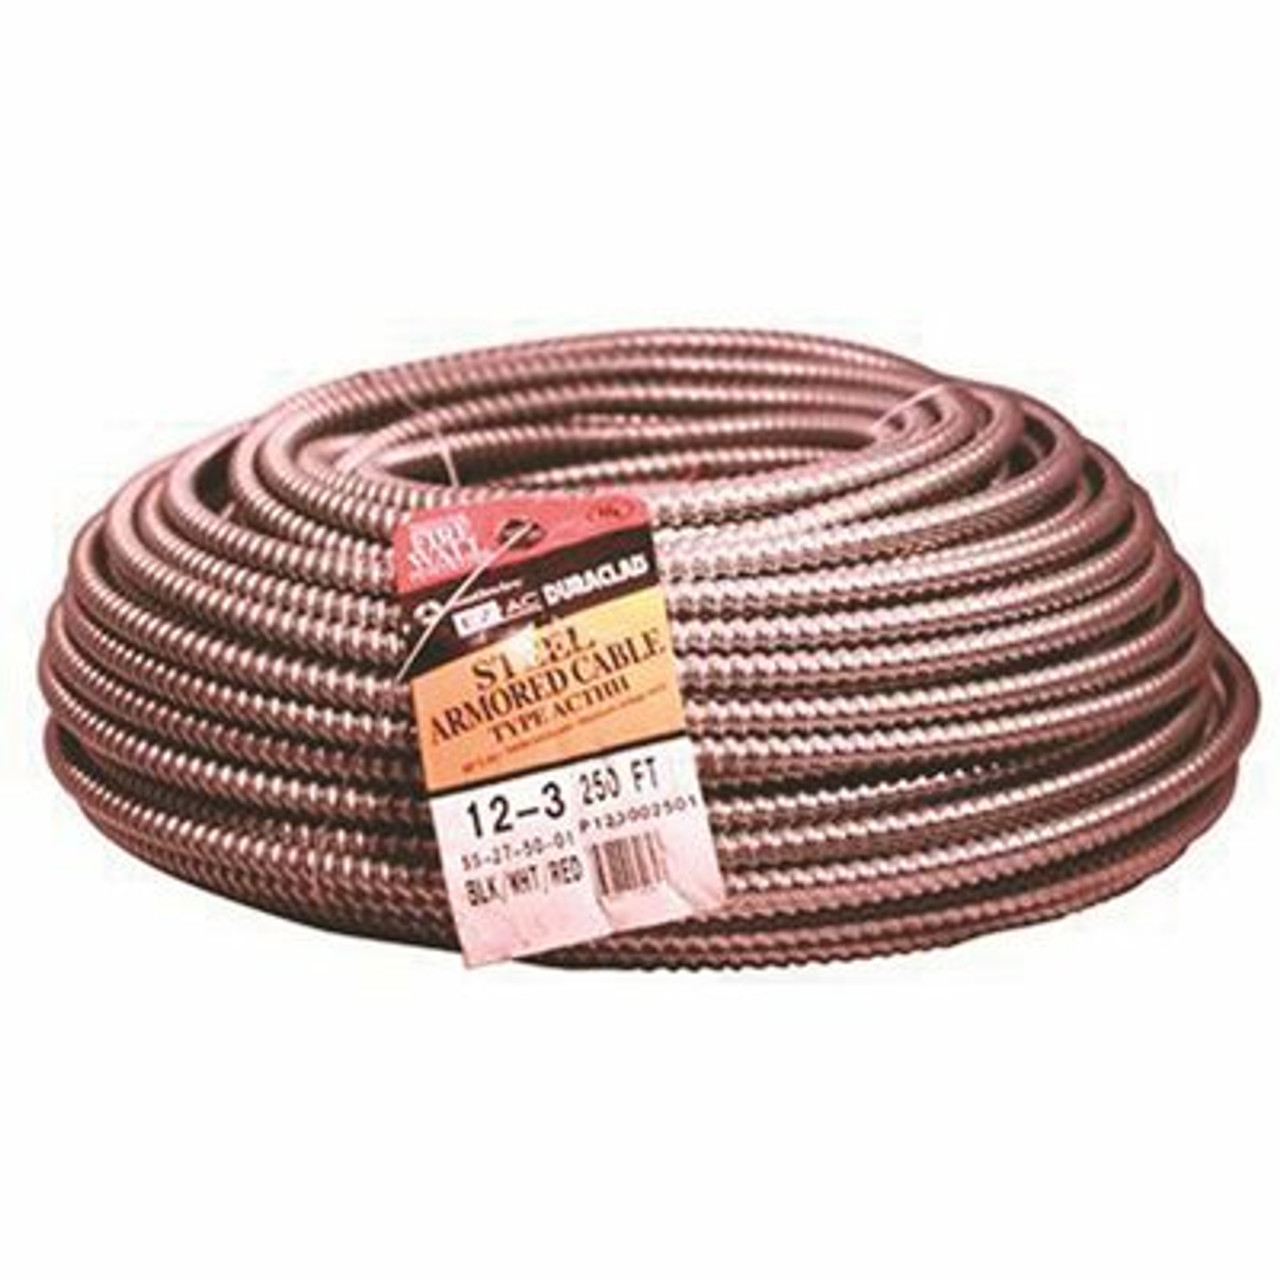 Southwire 250 Ft. 12/3 Solid Cu Bx/Ac (Duraclad) Armored Steel Cable